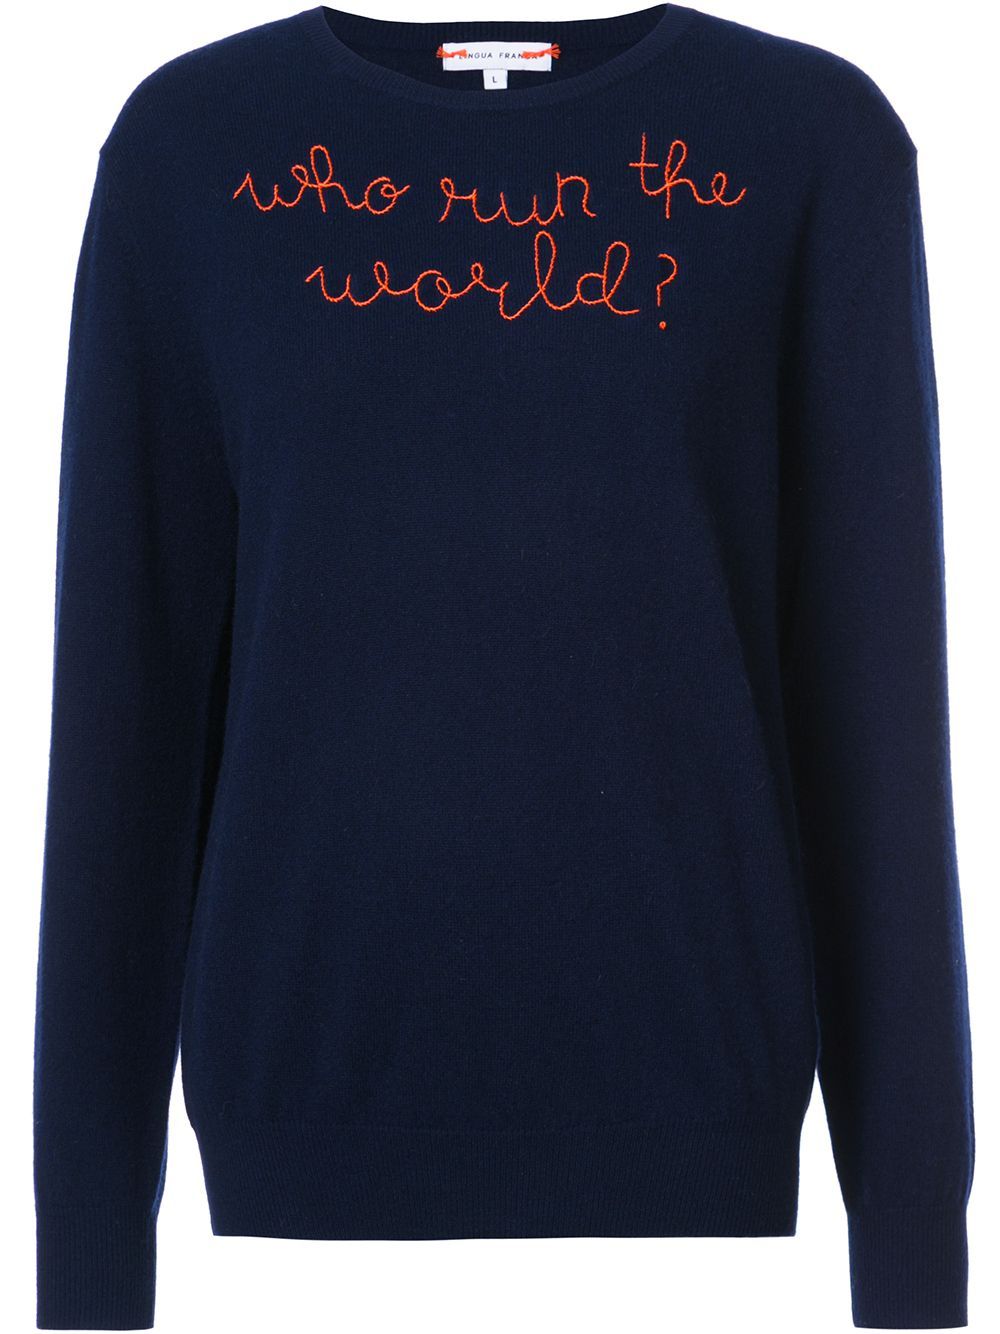 Lingua Franca quote embroidered sweater - Blue | FarFetch US